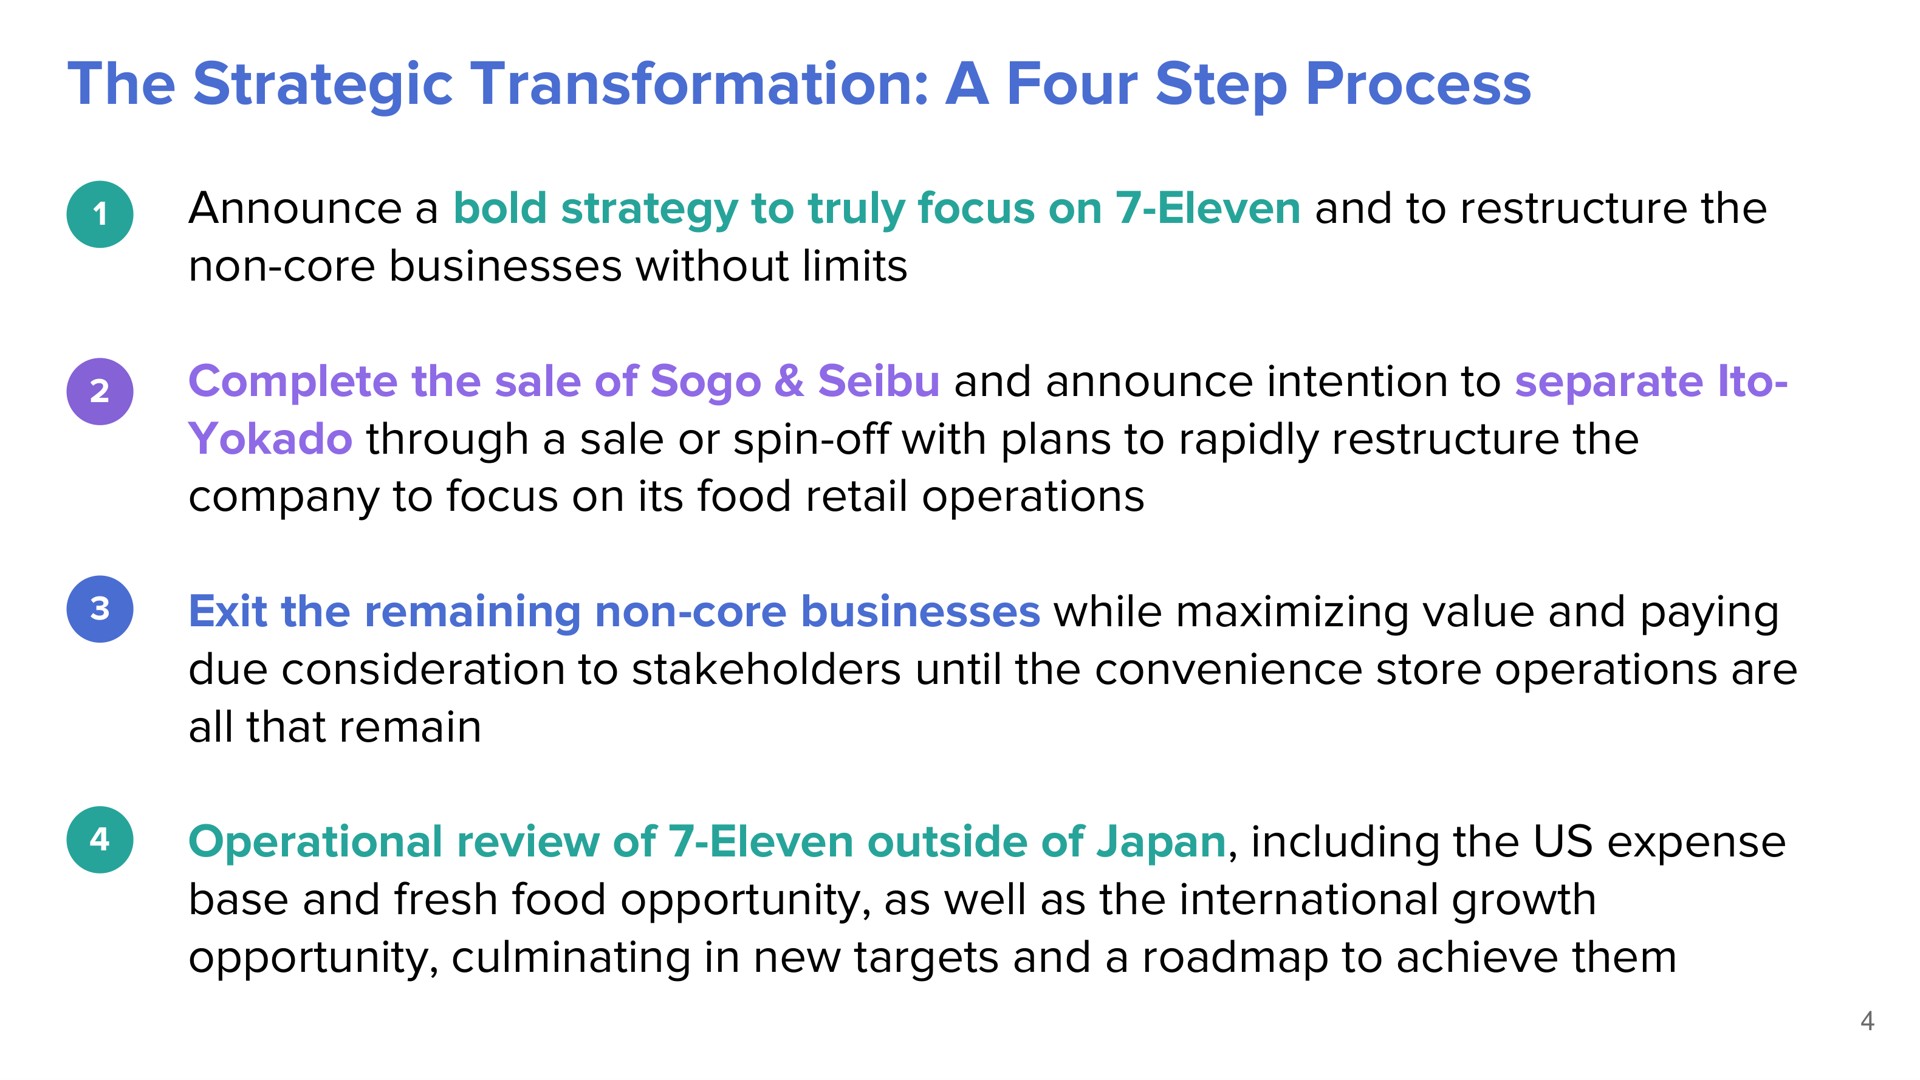 the strategic transformation a four step process announce a bold strategy to truly focus on eleven and to the non core businesses without limits complete the sale of and announce intention to separate through a sale or spin off with plans to rapidly the company to focus on its food retail operations exit the remaining non core businesses while maximizing value and paying due consideration to stakeholders until the convenience store operations are all that remain operational review of eleven outside of japan including the us expense base and fresh food opportunity as well as the international growth opportunity culminating in new targets and a to achieve them | ValueAct Capital